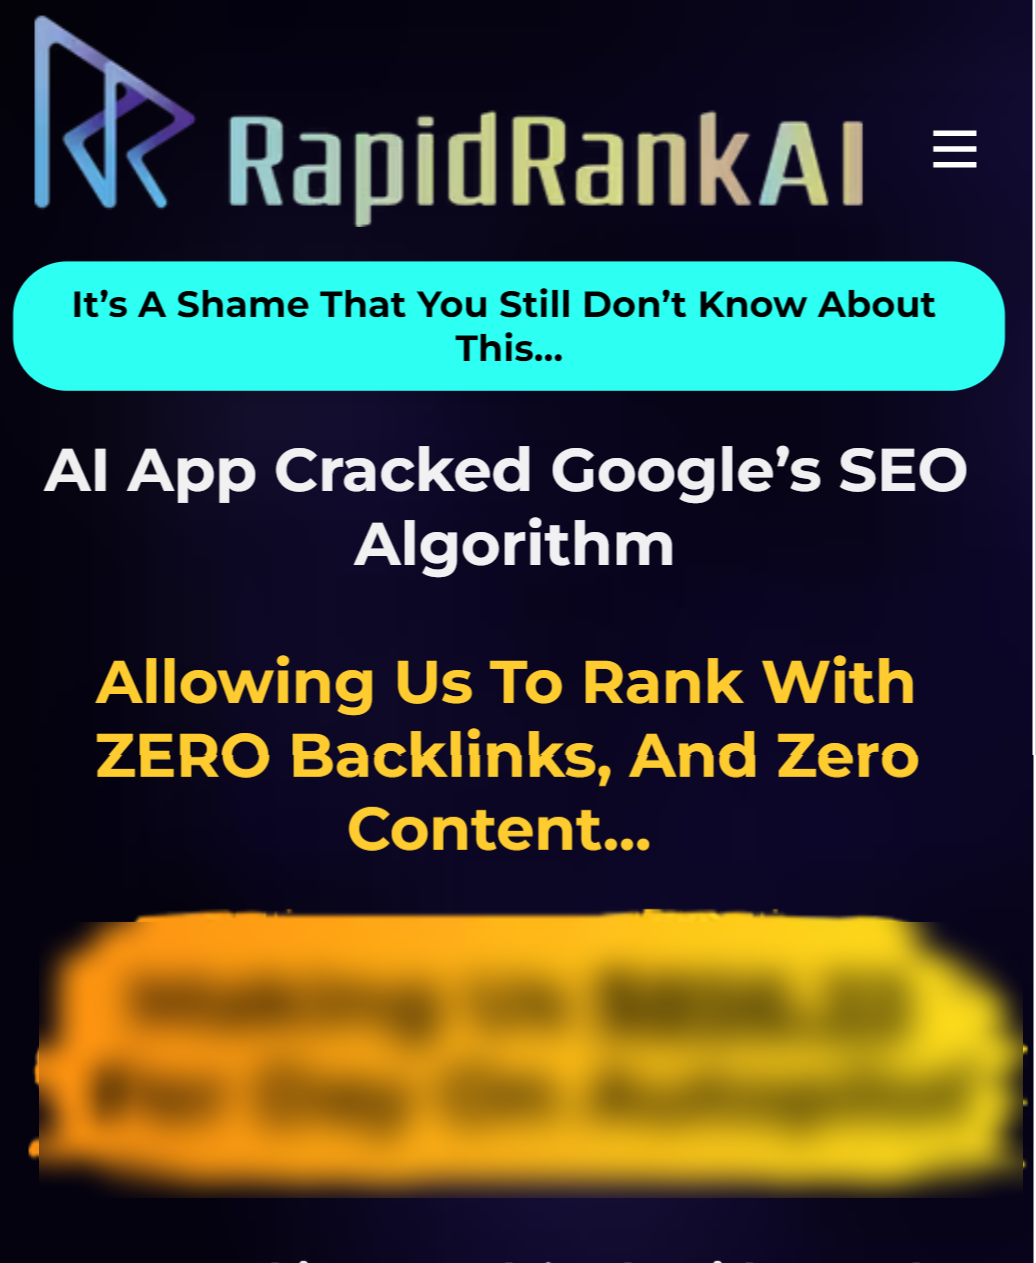 RapidRankAi Live RapidRanker AI Review And Worth: This AI App Revealed Google’s SEO Algorithm Allowing You To Rank With ZERO Backlinks And Zero Content